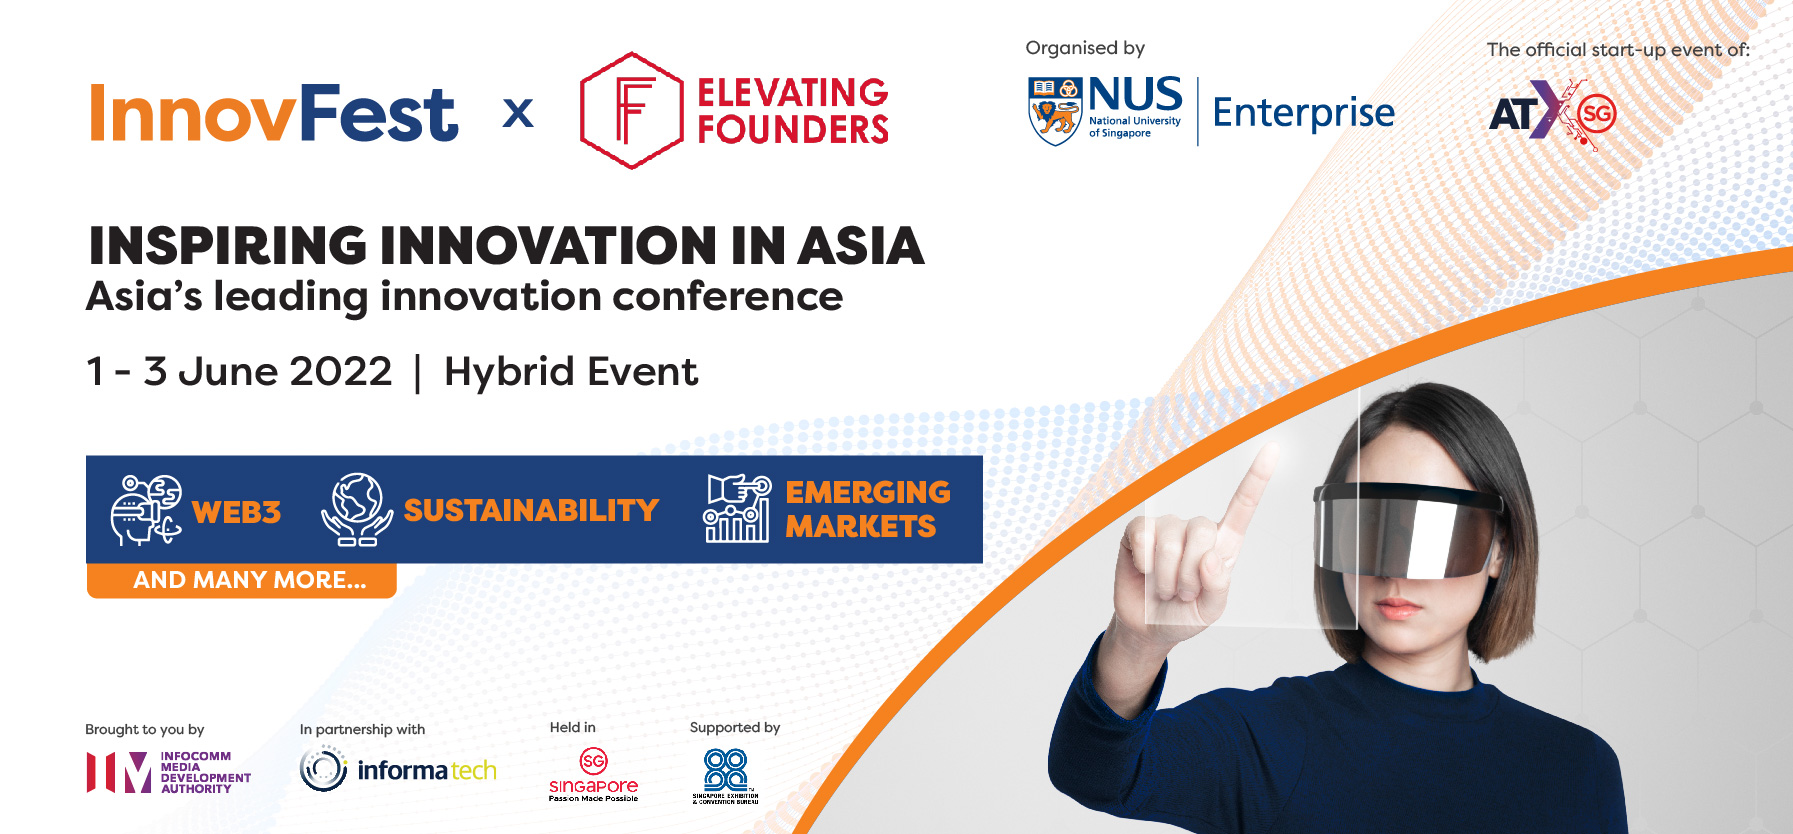 InnovFest x Elevating Founders 2022